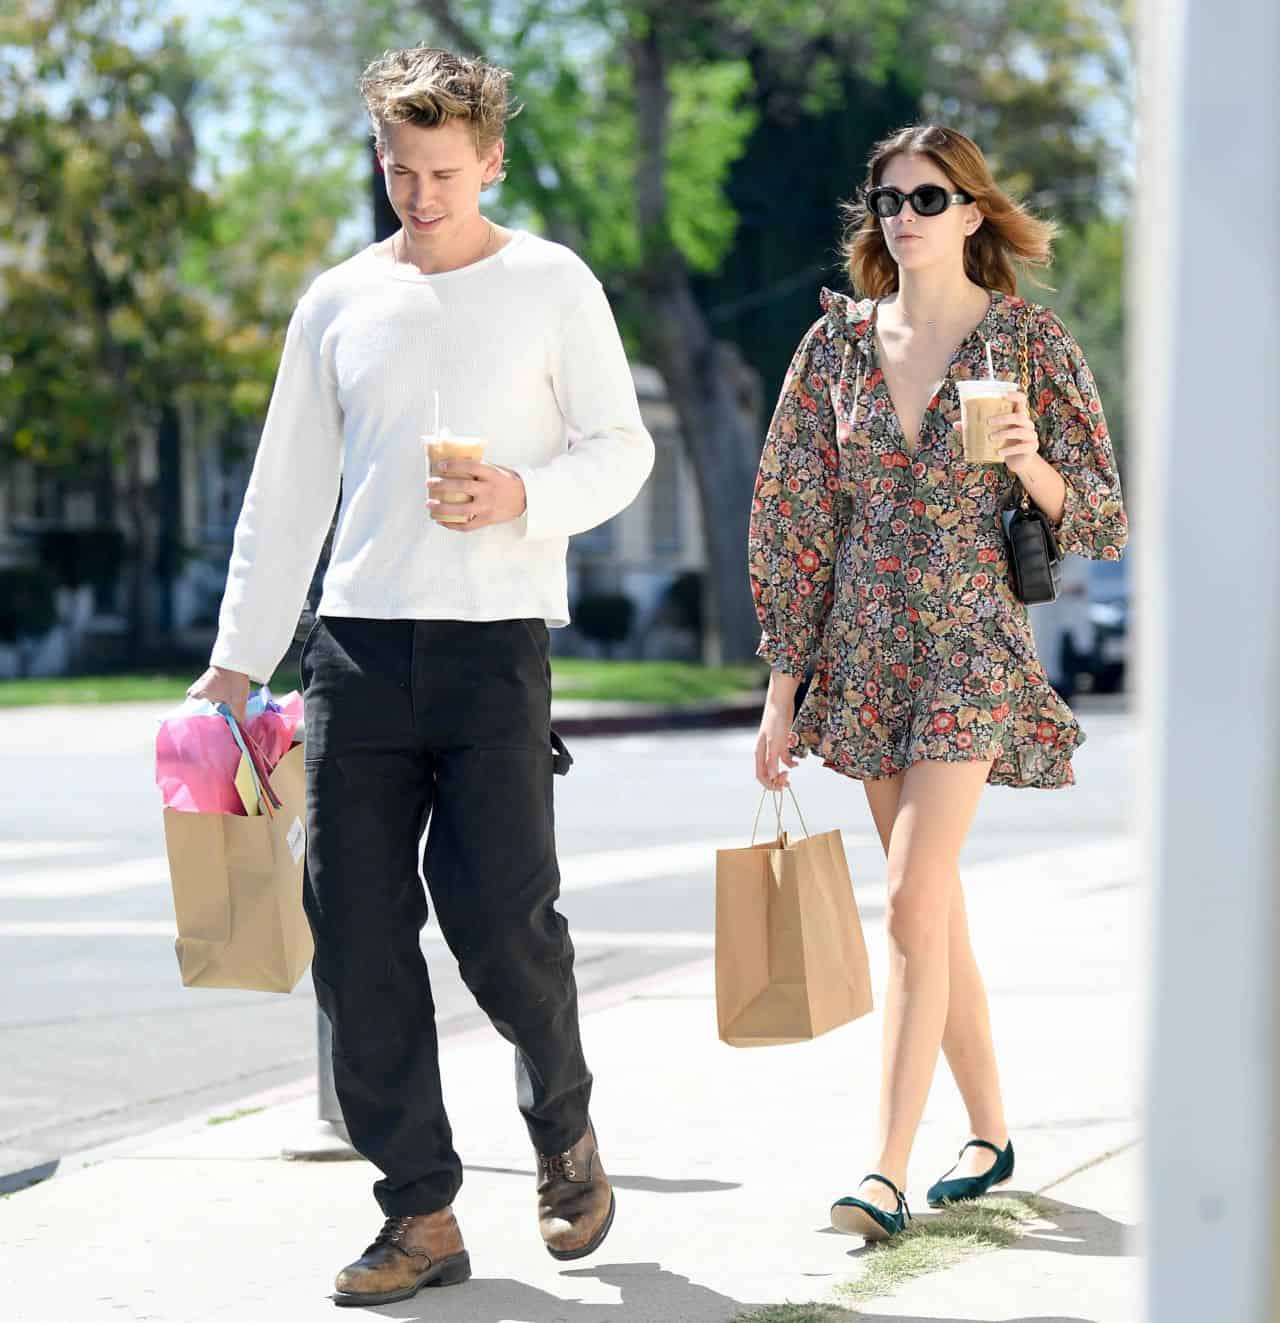 Kaia Gerber Stepped Out in an Adorable Mini Dress with Austin Butler in LA